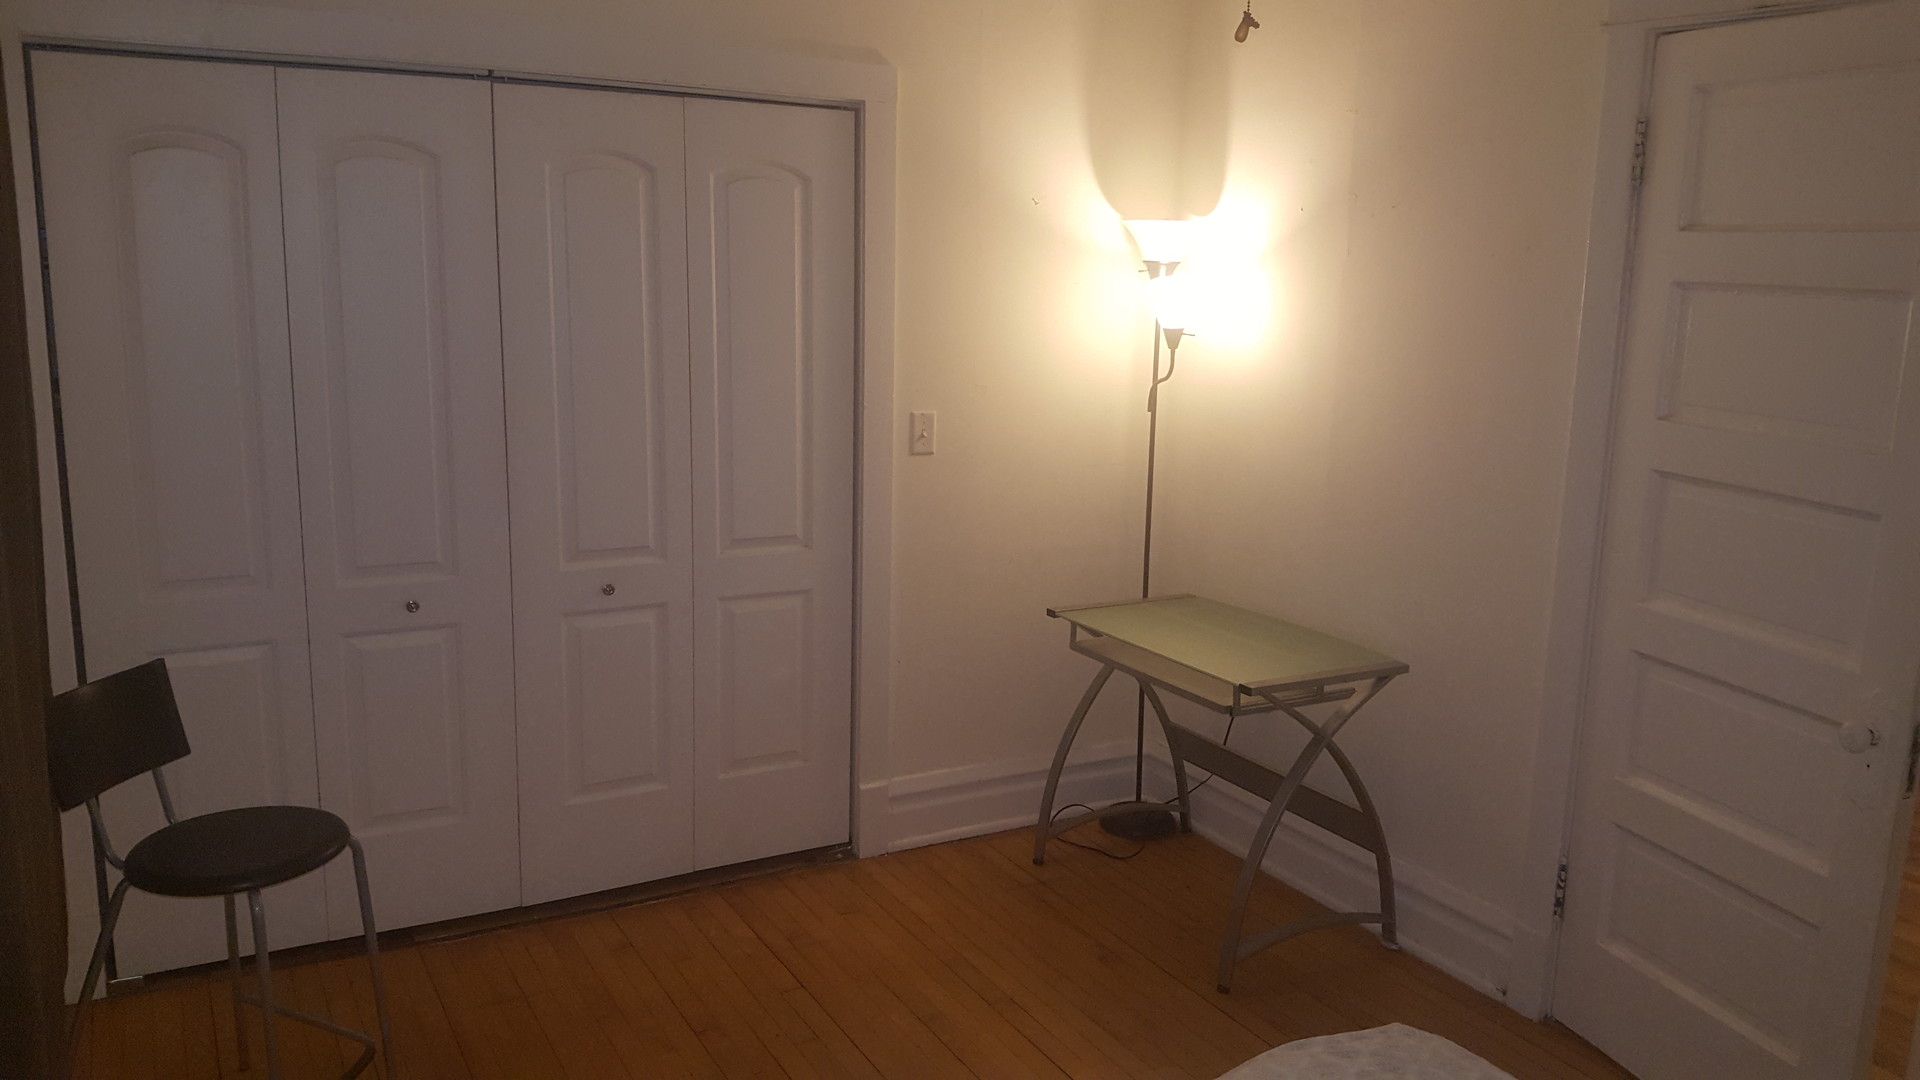 Room For Rent Within 2 Bedroom Apt